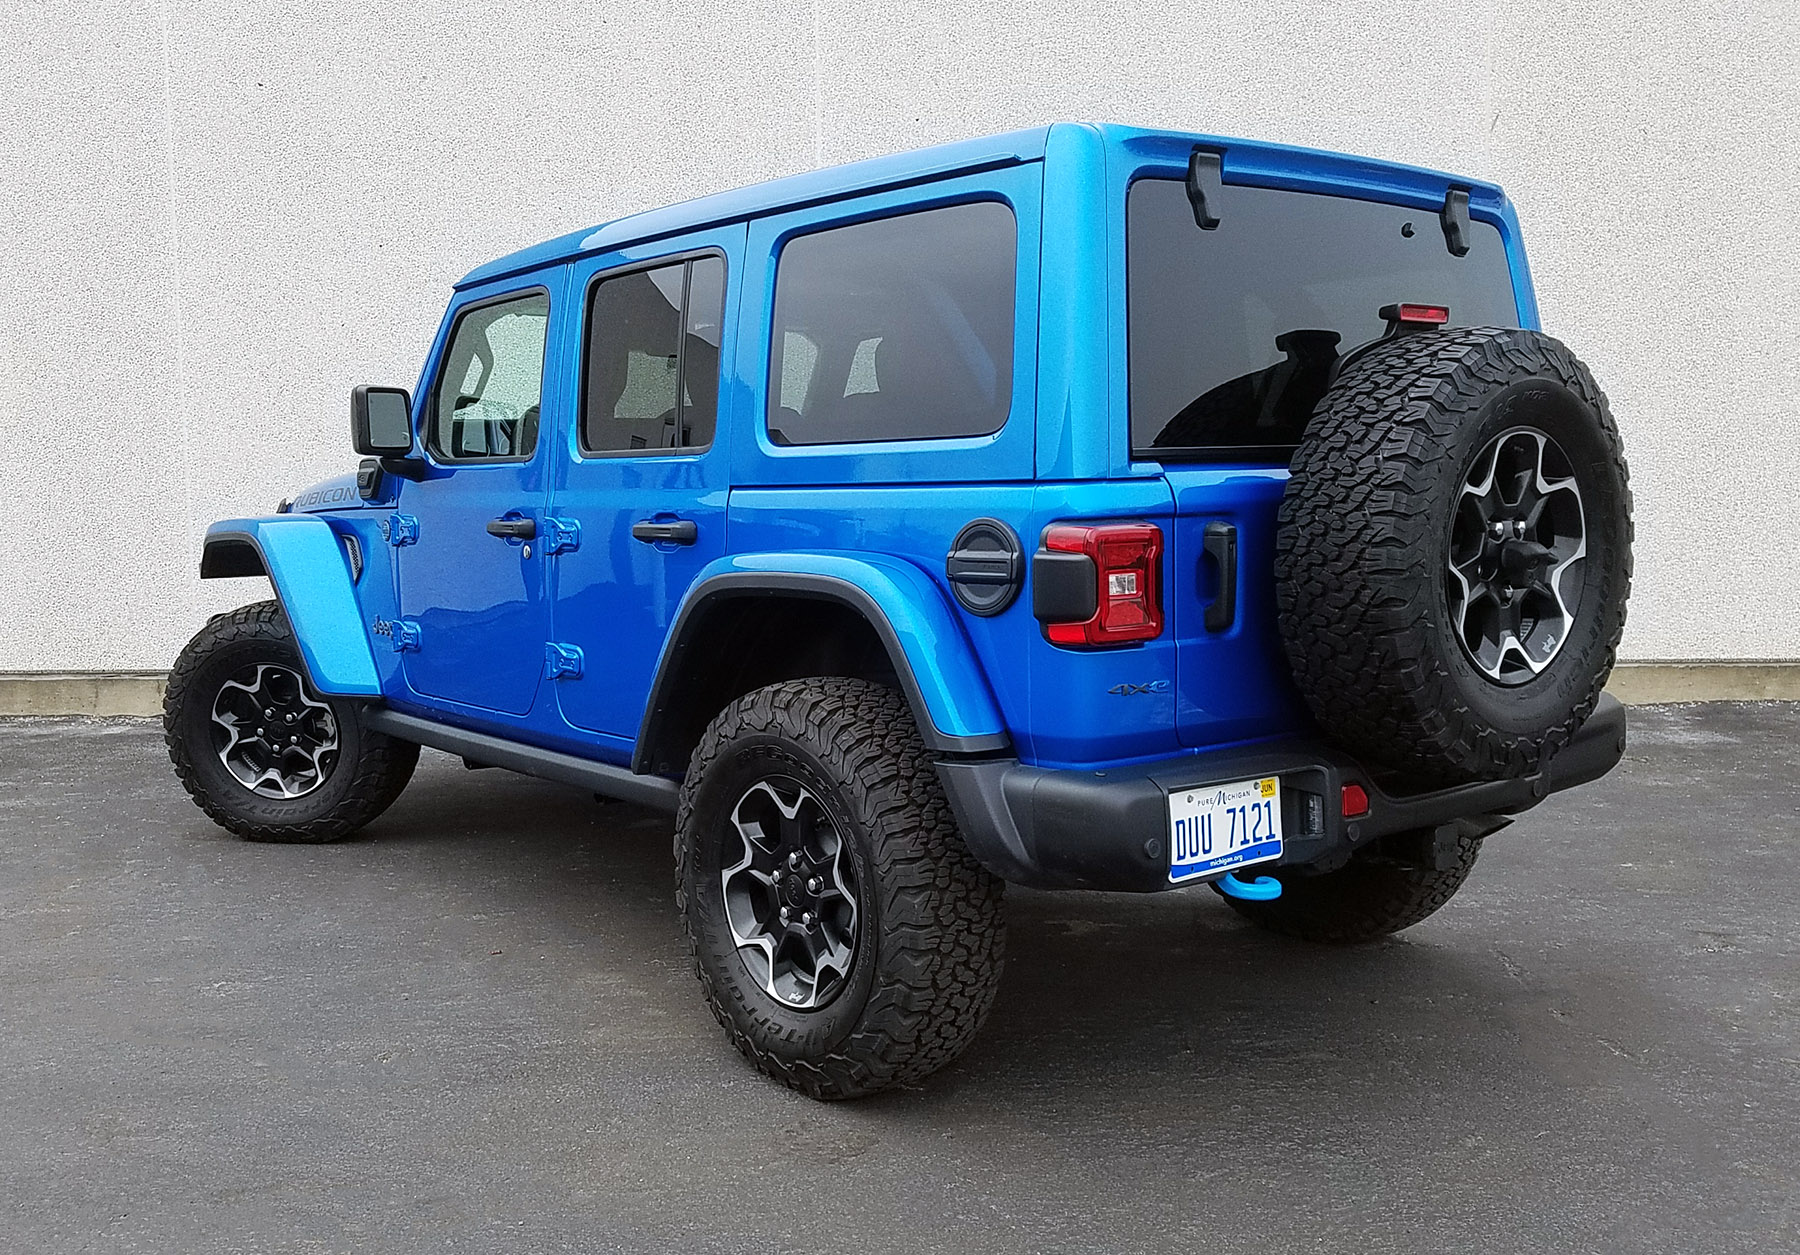 Test Drive: 2021 Jeep Wrangler Unlimited Rubicon 4xe | The Daily Drive |  Consumer Guide® The Daily Drive | Consumer Guide®